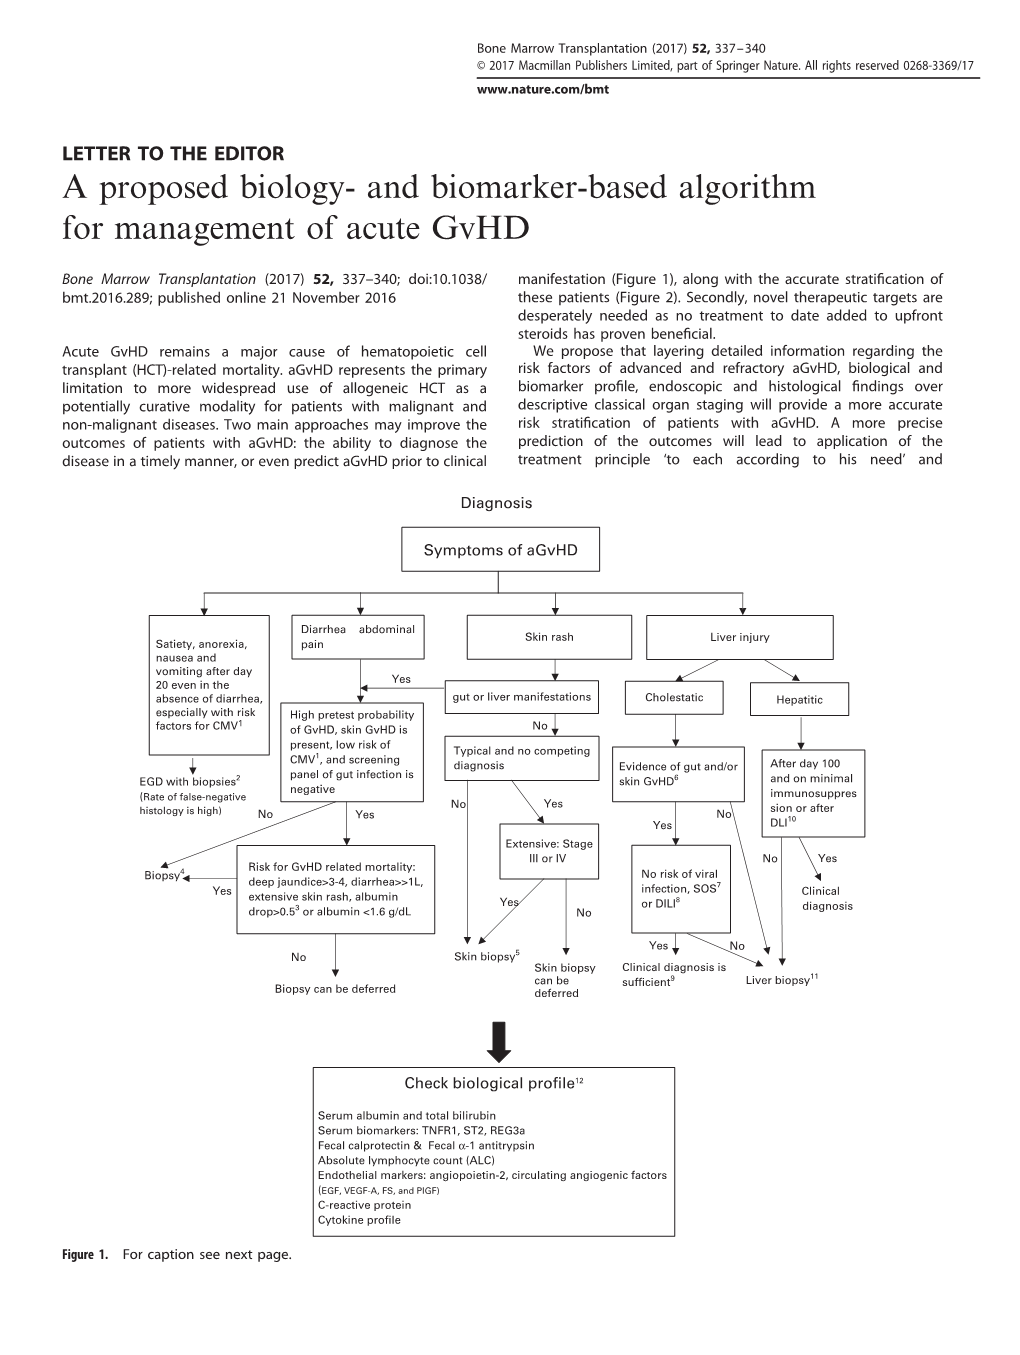 And Biomarker-Based Algorithm for Management of Acute Gvhd